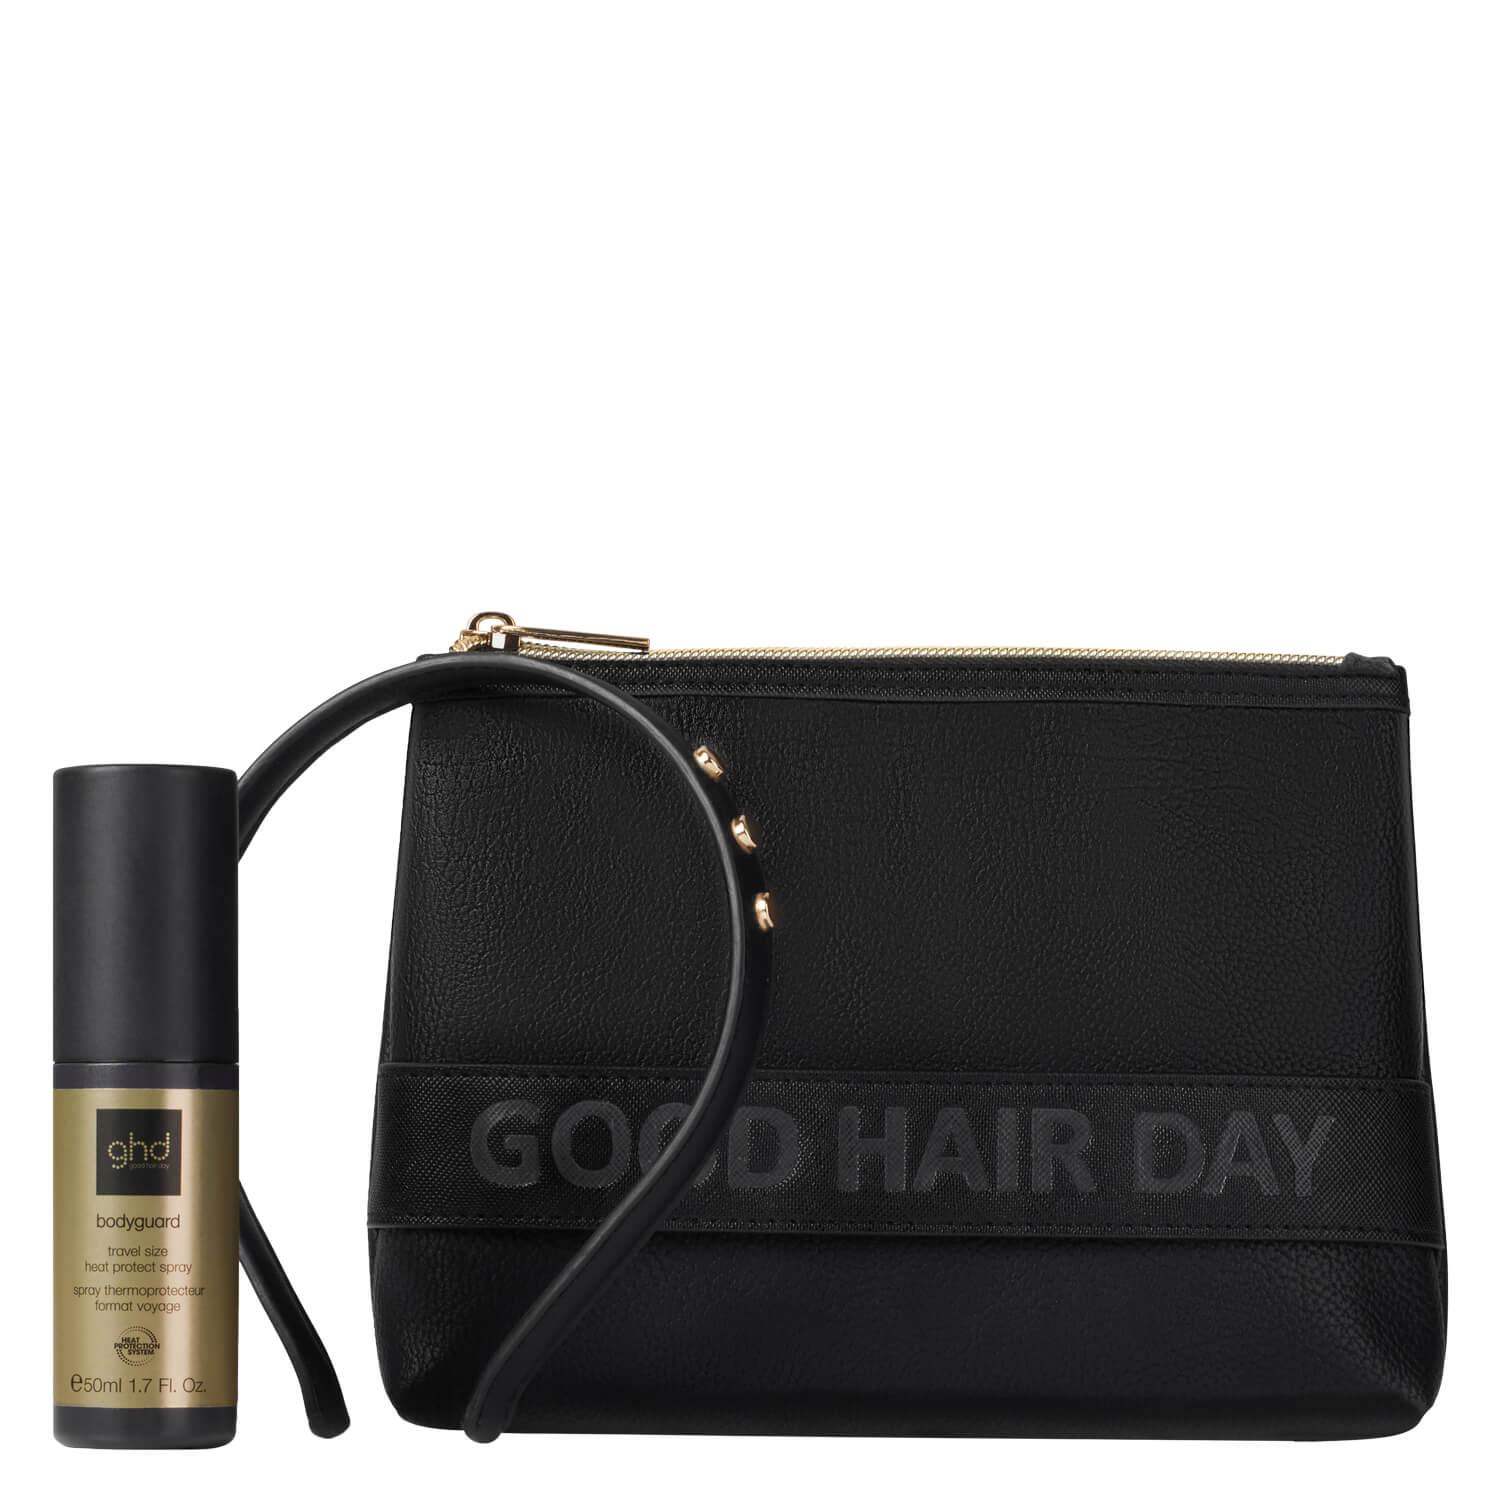 ghd Style - Good Hair Day Gift Set